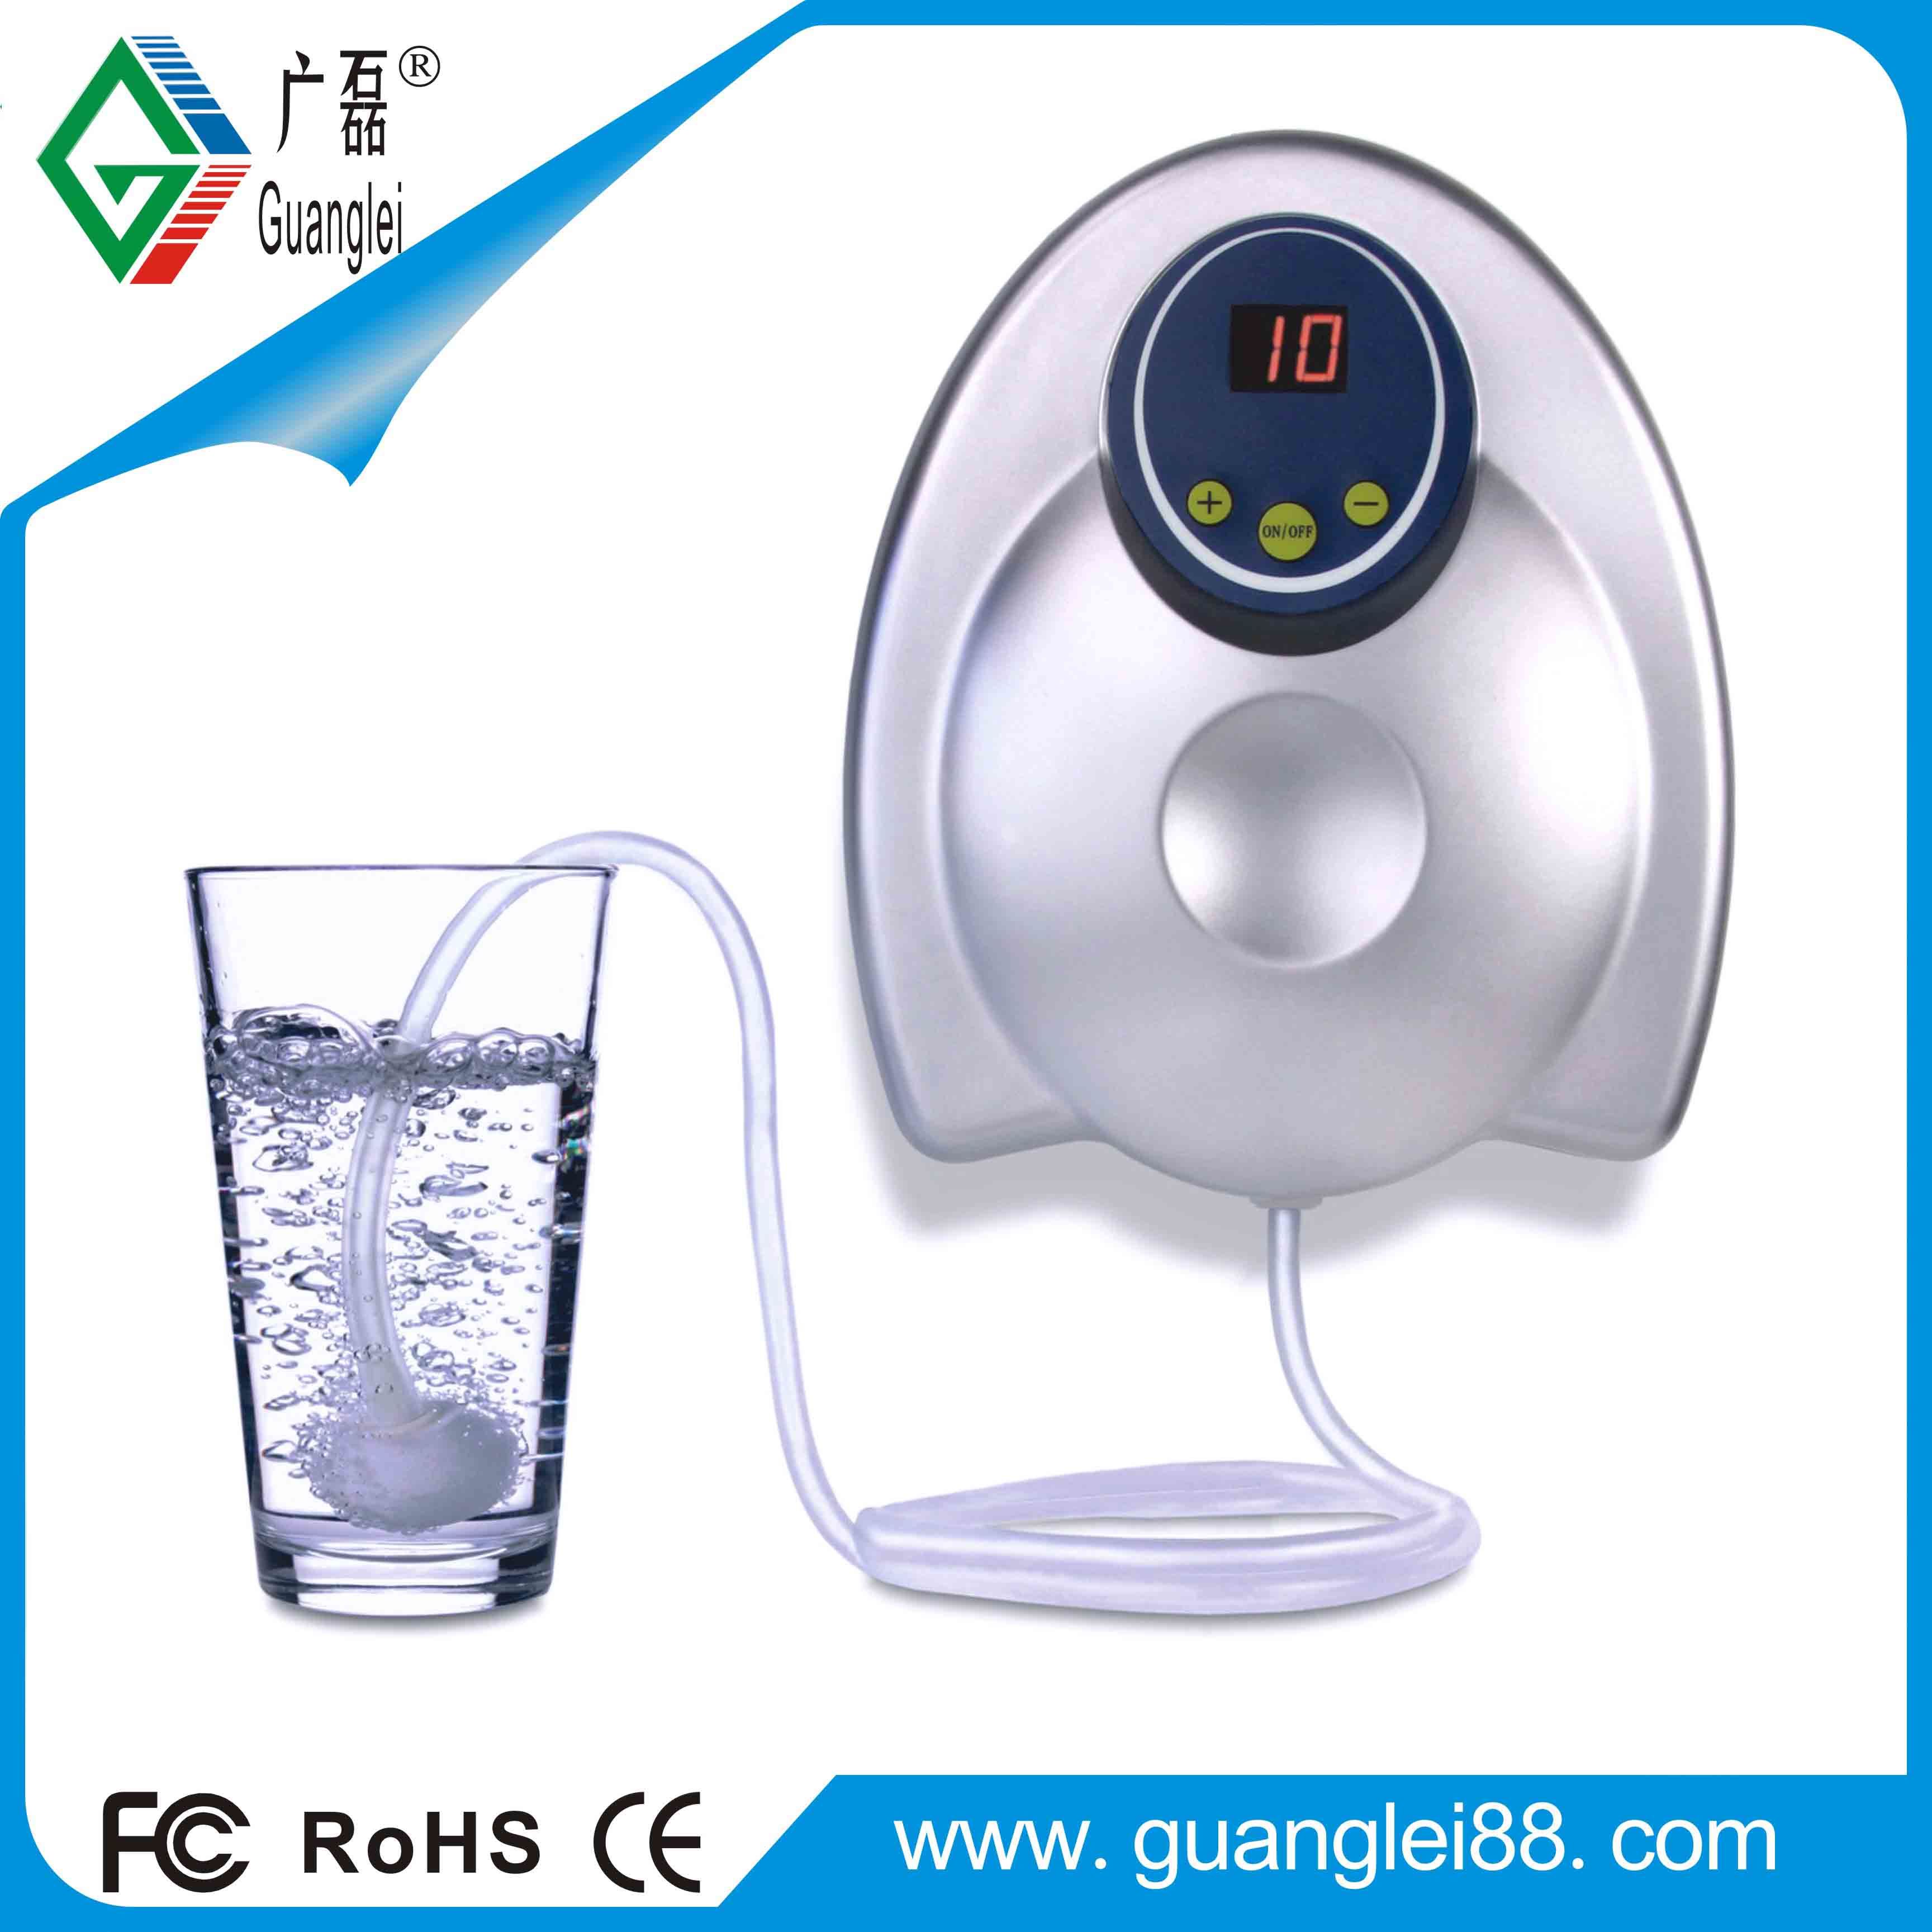 OEM Ozone Generator Water Purifier3188 with 400mg O3 for Home